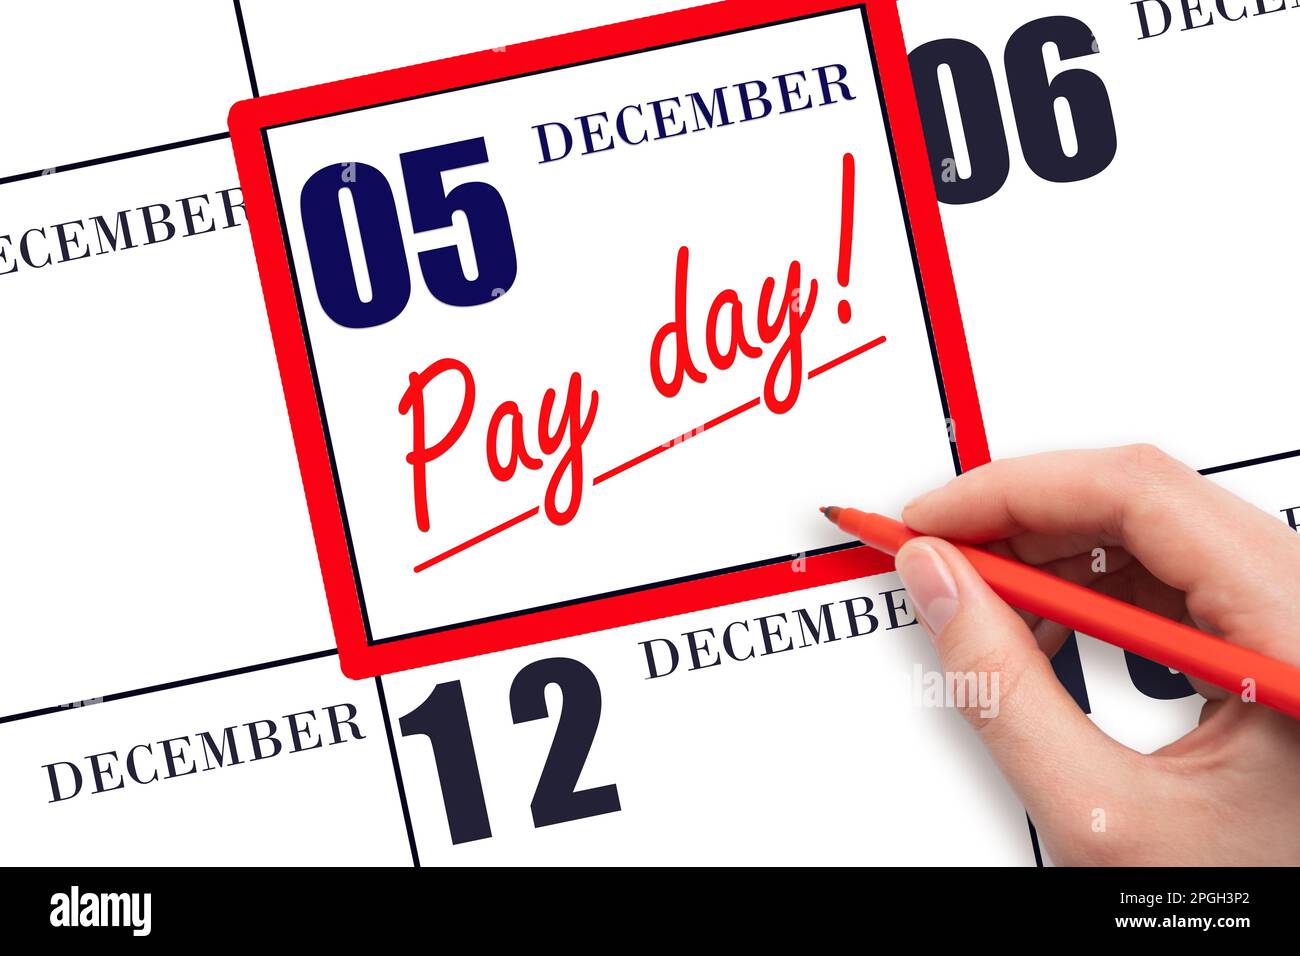 5th day of December. Hand writing text PAY DATE on calendar date December 5 and underline it. Payment due date. Reminder concept of payment. Winter mo Stock Photo